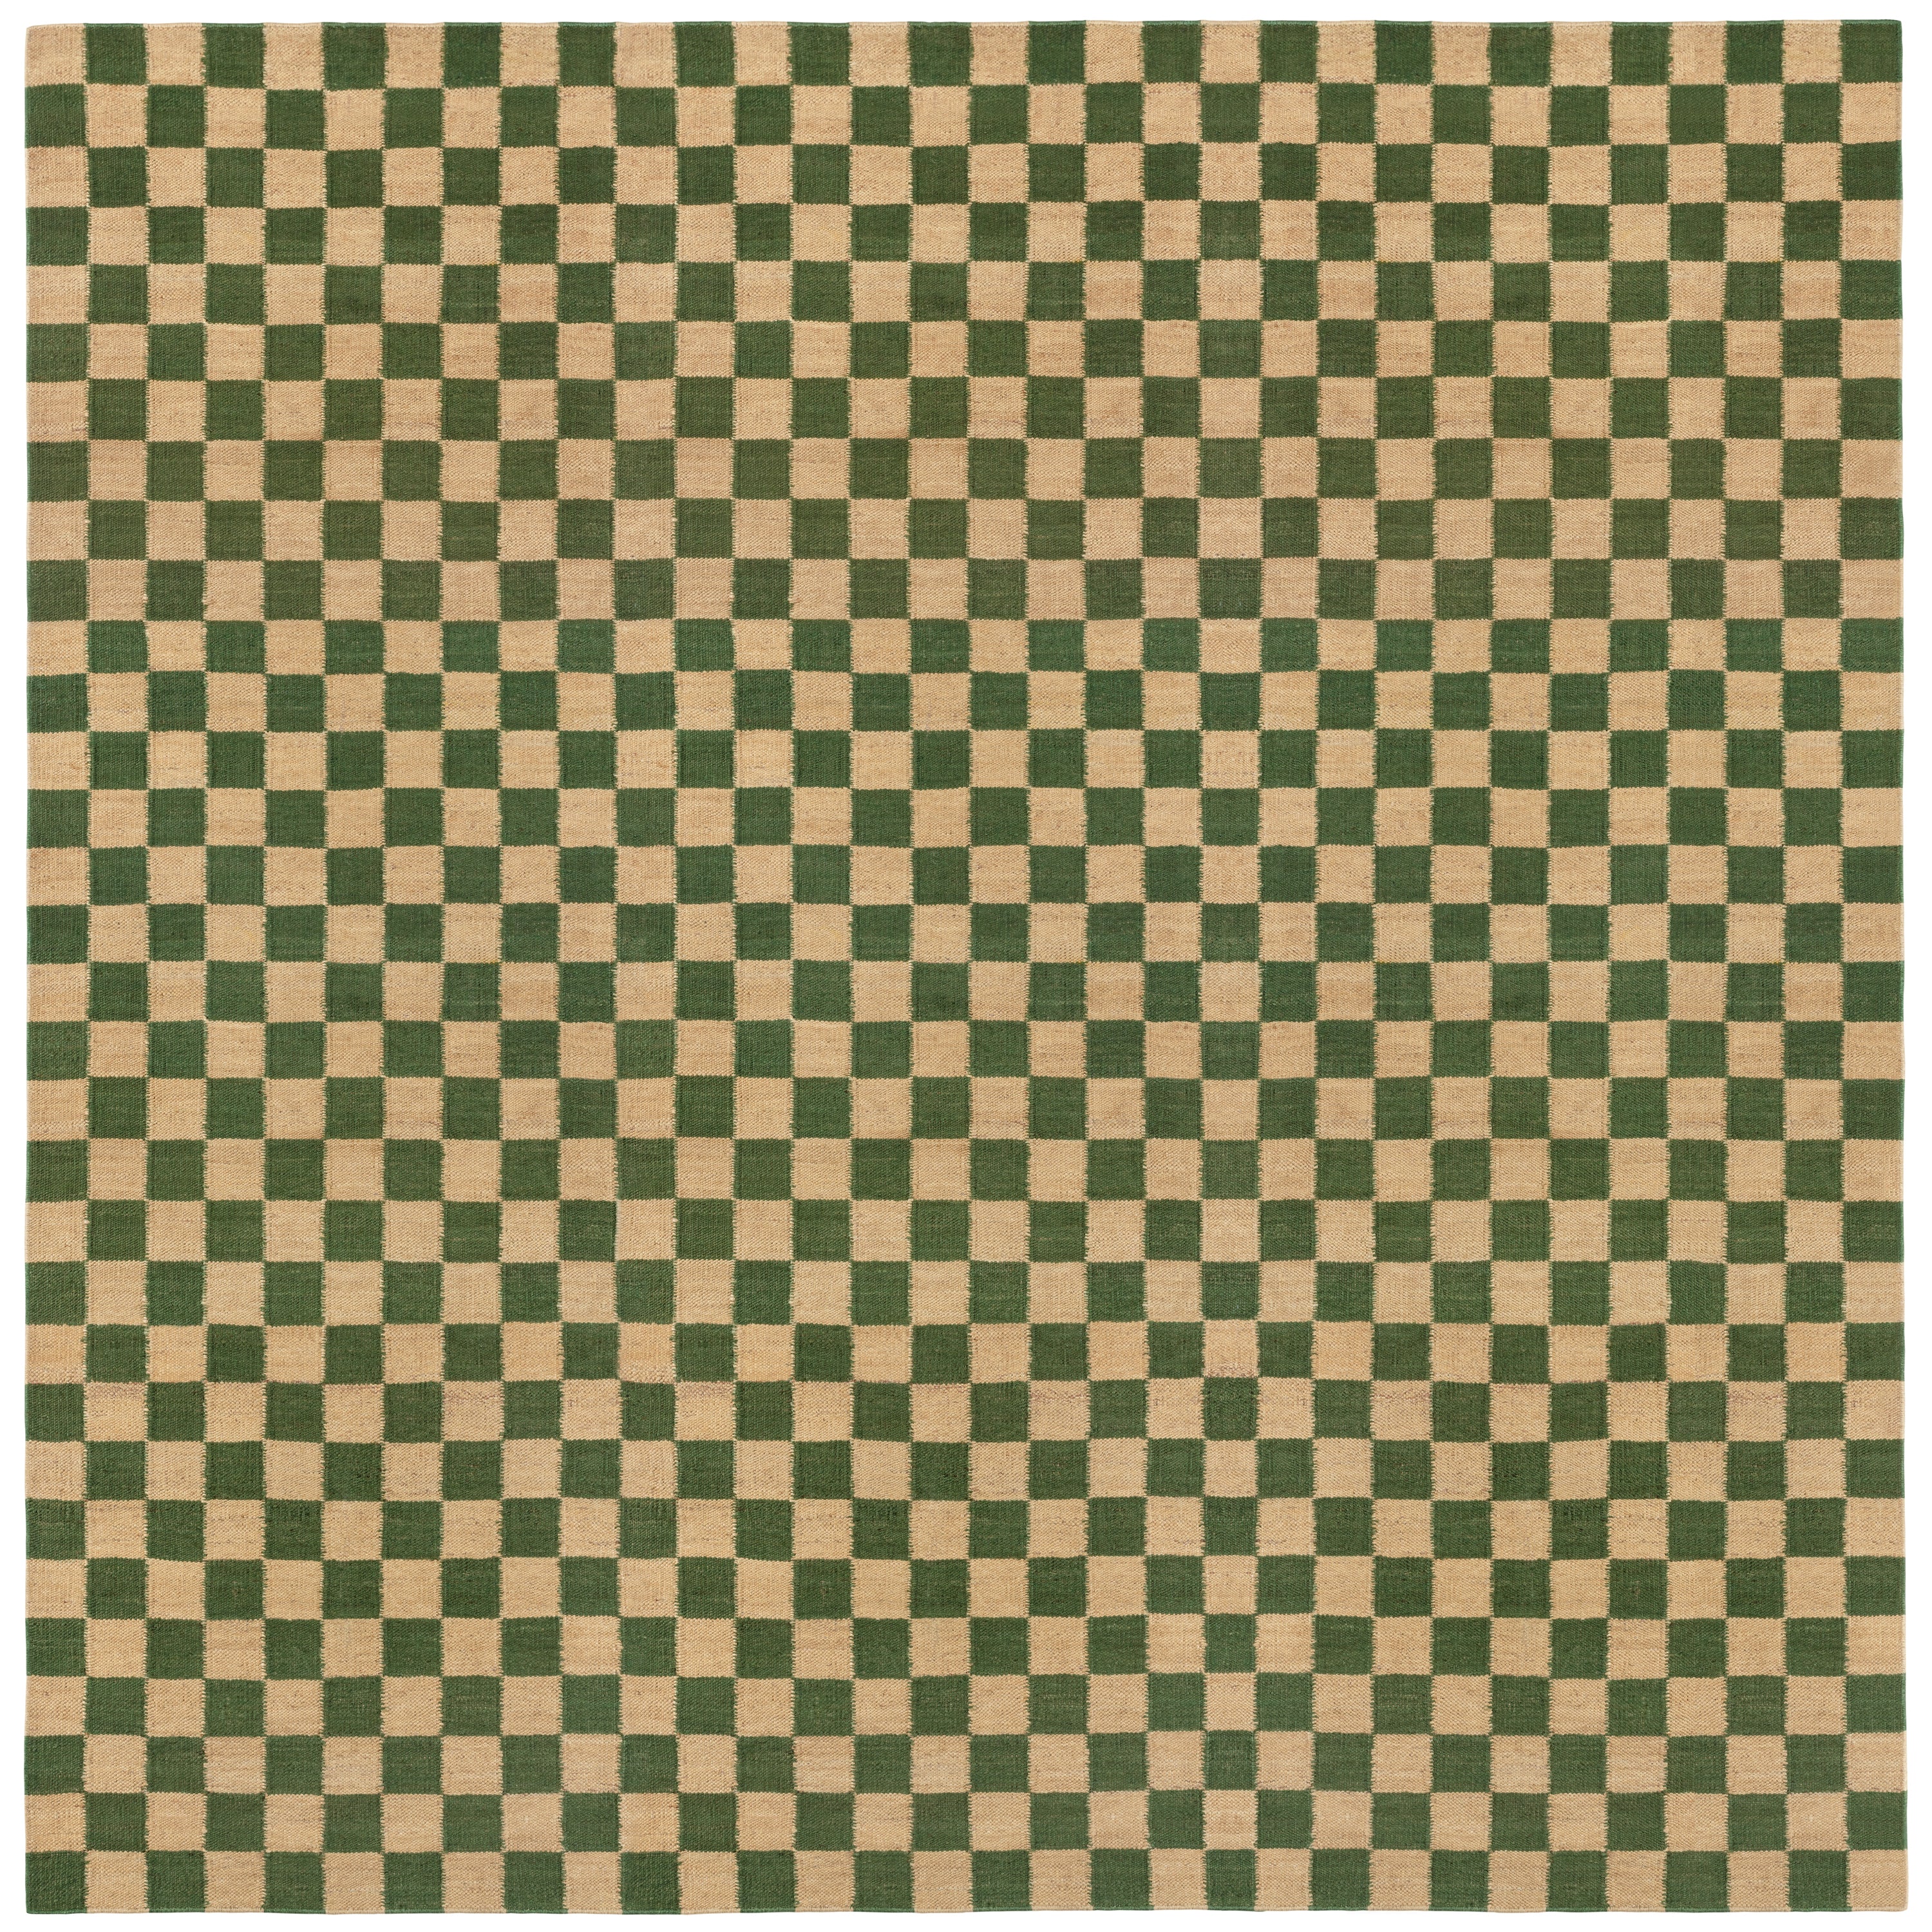 Checkerboard Rug in Pawn, a green and tan checkered pattern. 